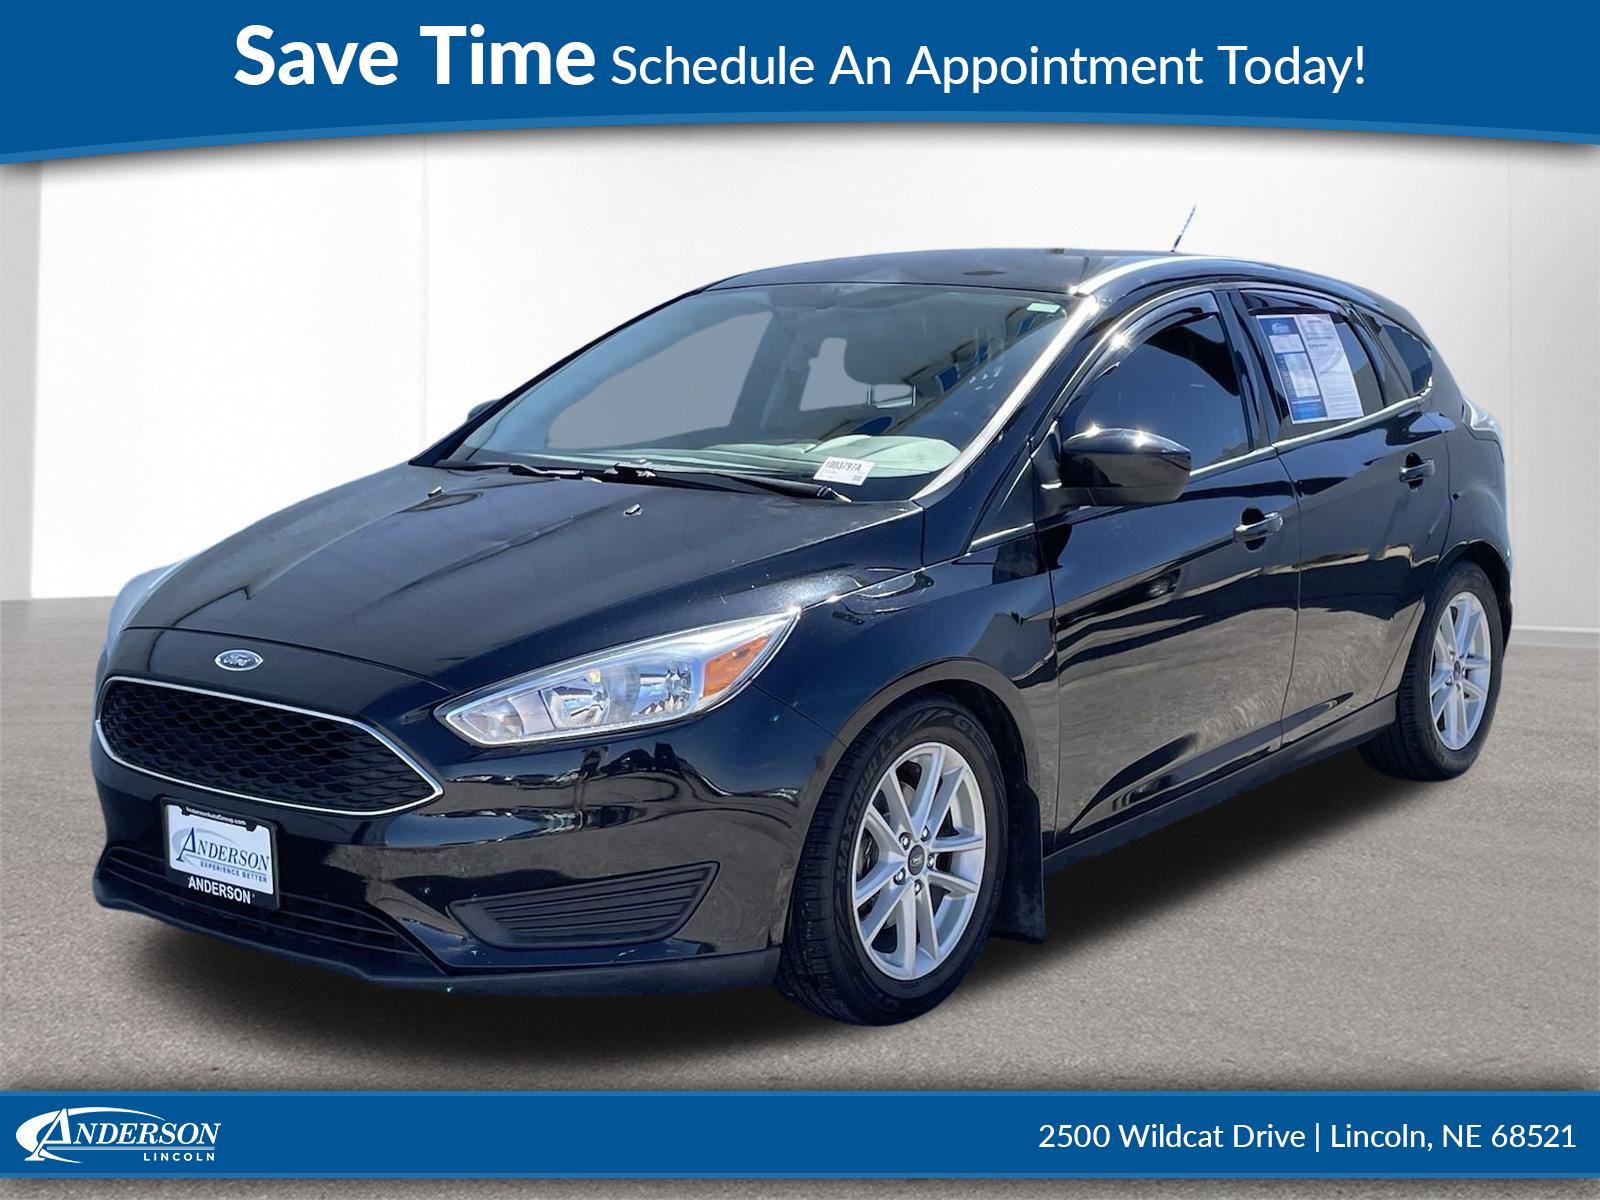 Used 2018 Ford Focus SE Stock: 1003797A